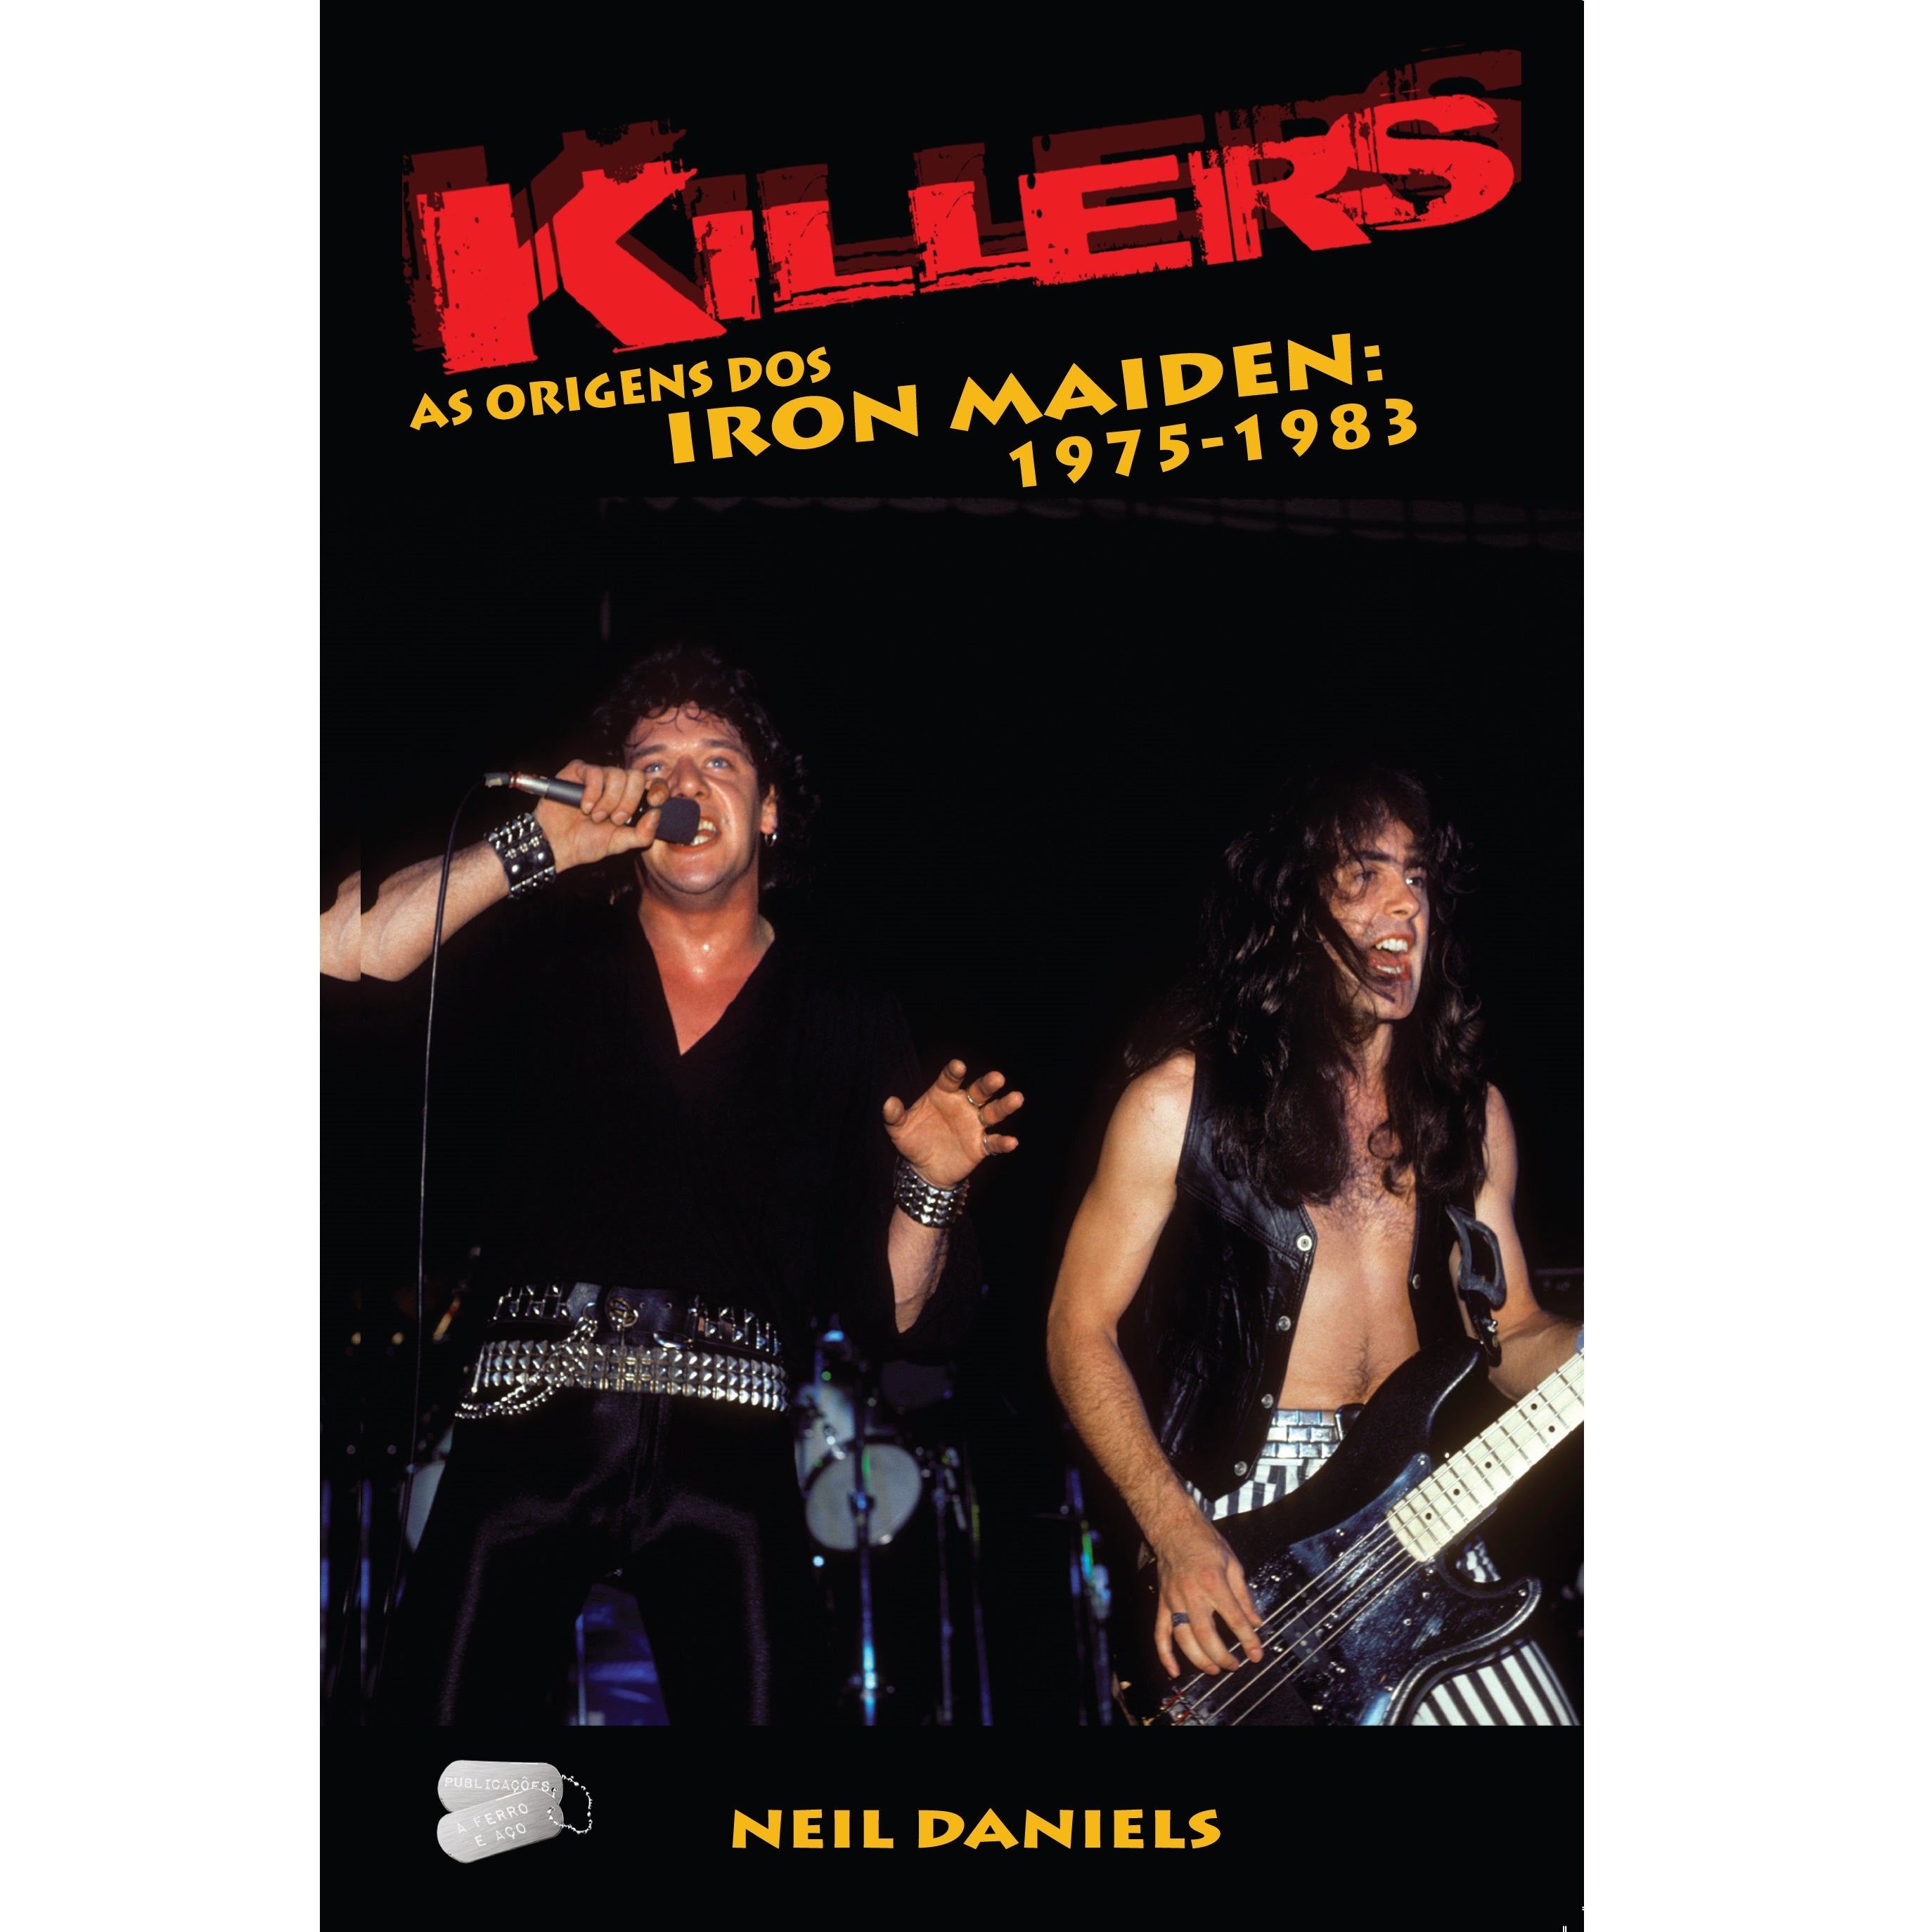 Killers - As Origens dos Iron Maiden: 1975-1983